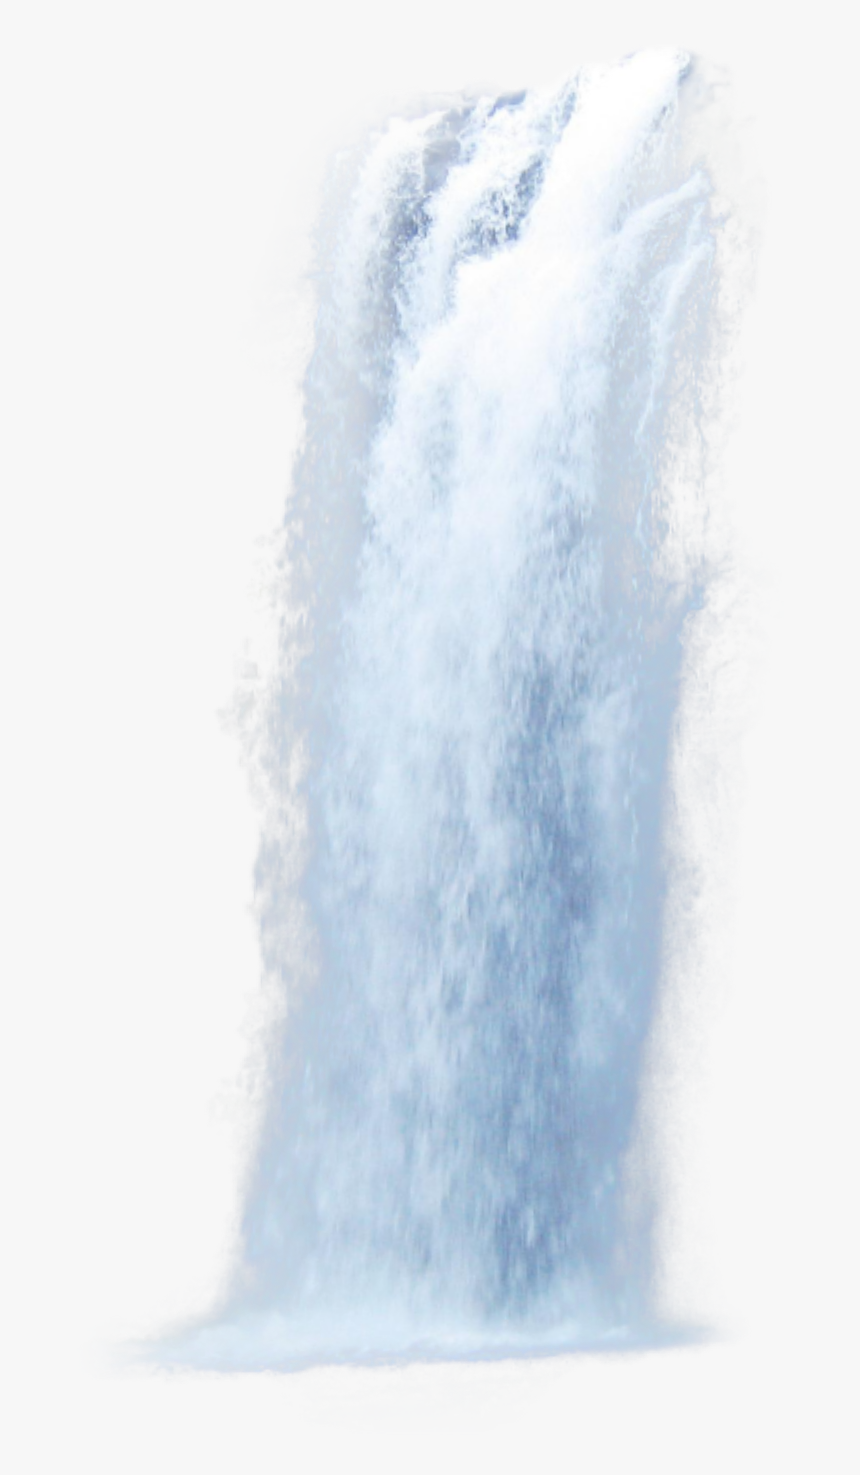 Transparent Waterfall Clipart Png - Waterfall Transparent, Png Download, Free Download